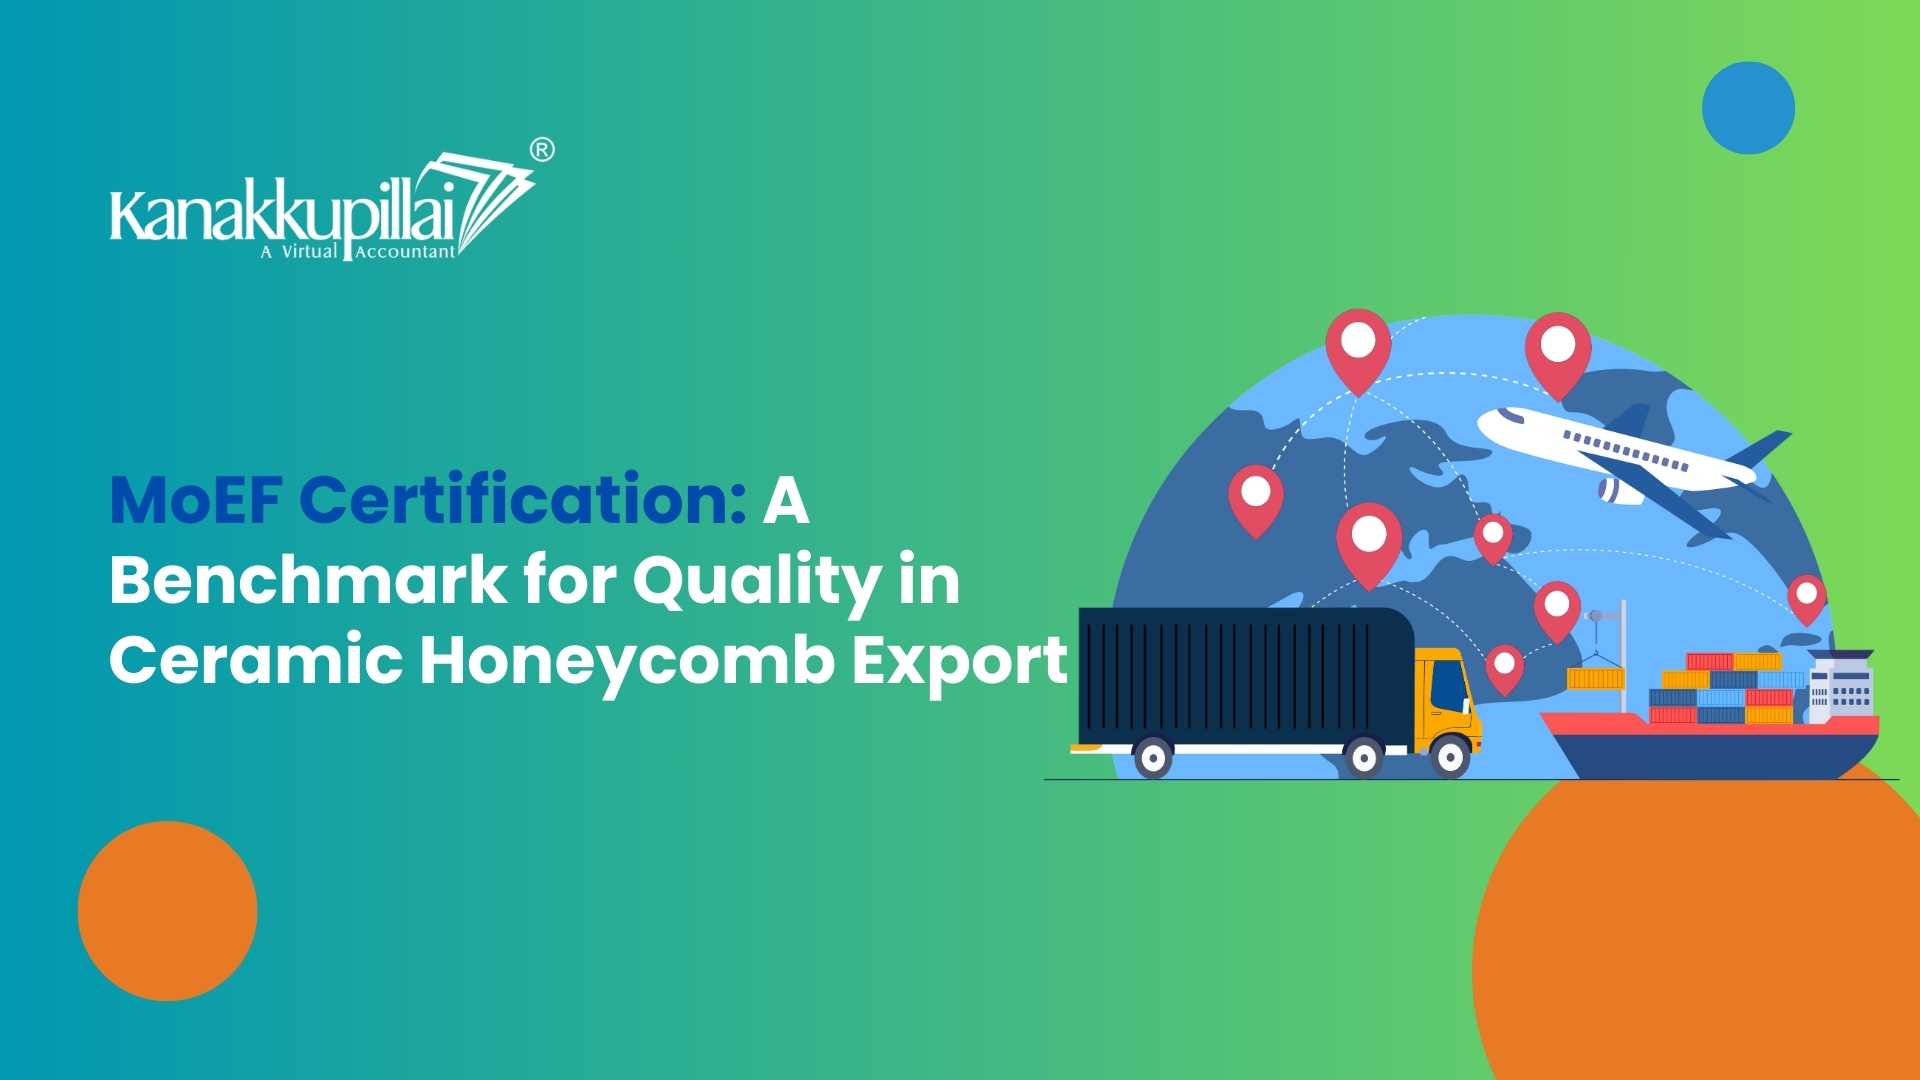 You are currently viewing MoEF Certification: A Benchmark for Quality in Ceramic Honeycomb Export